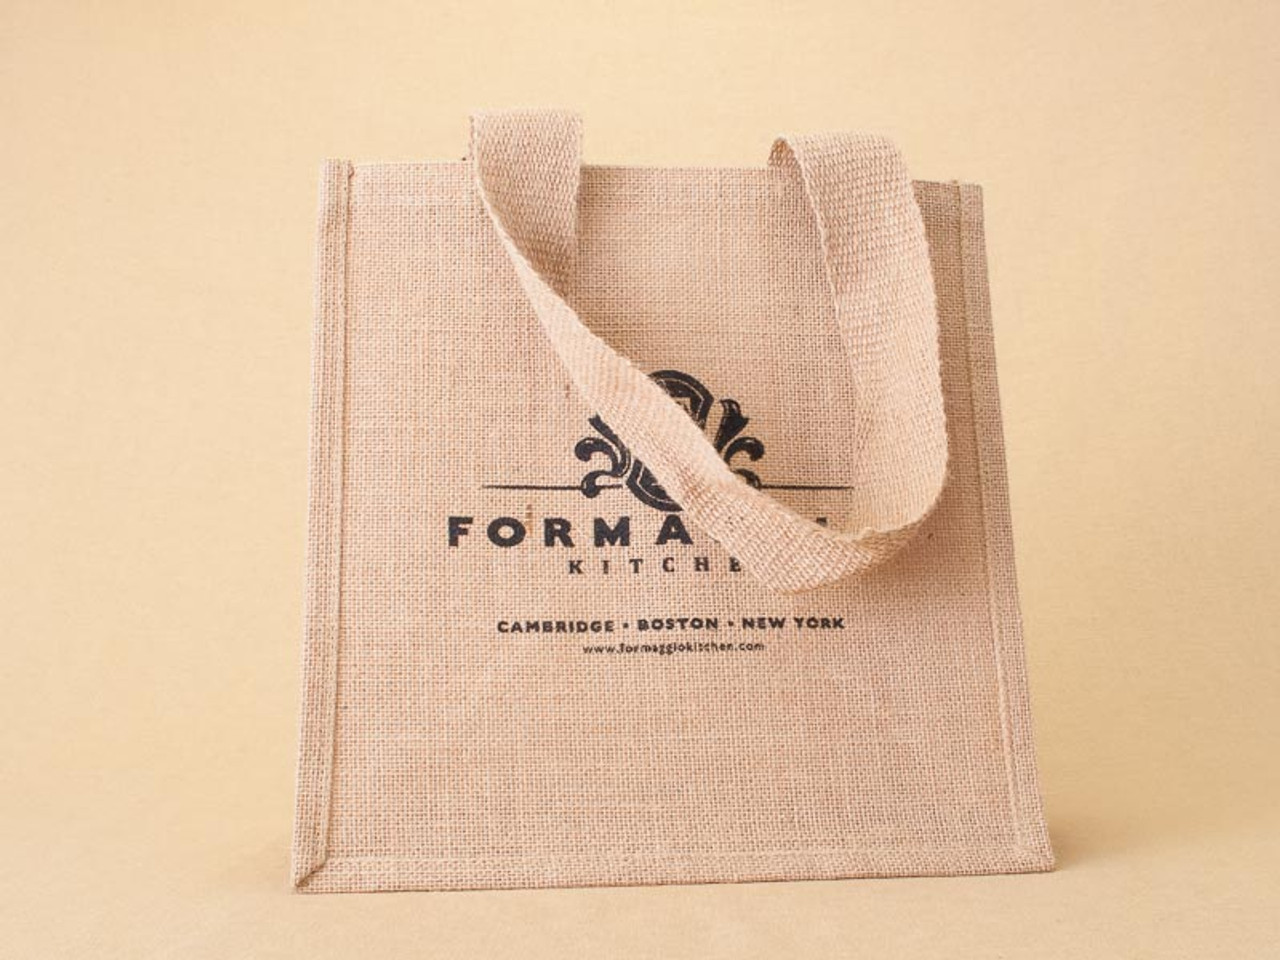 All about Eco-Friendly Jute Bags Uses Benefits and Wide Application